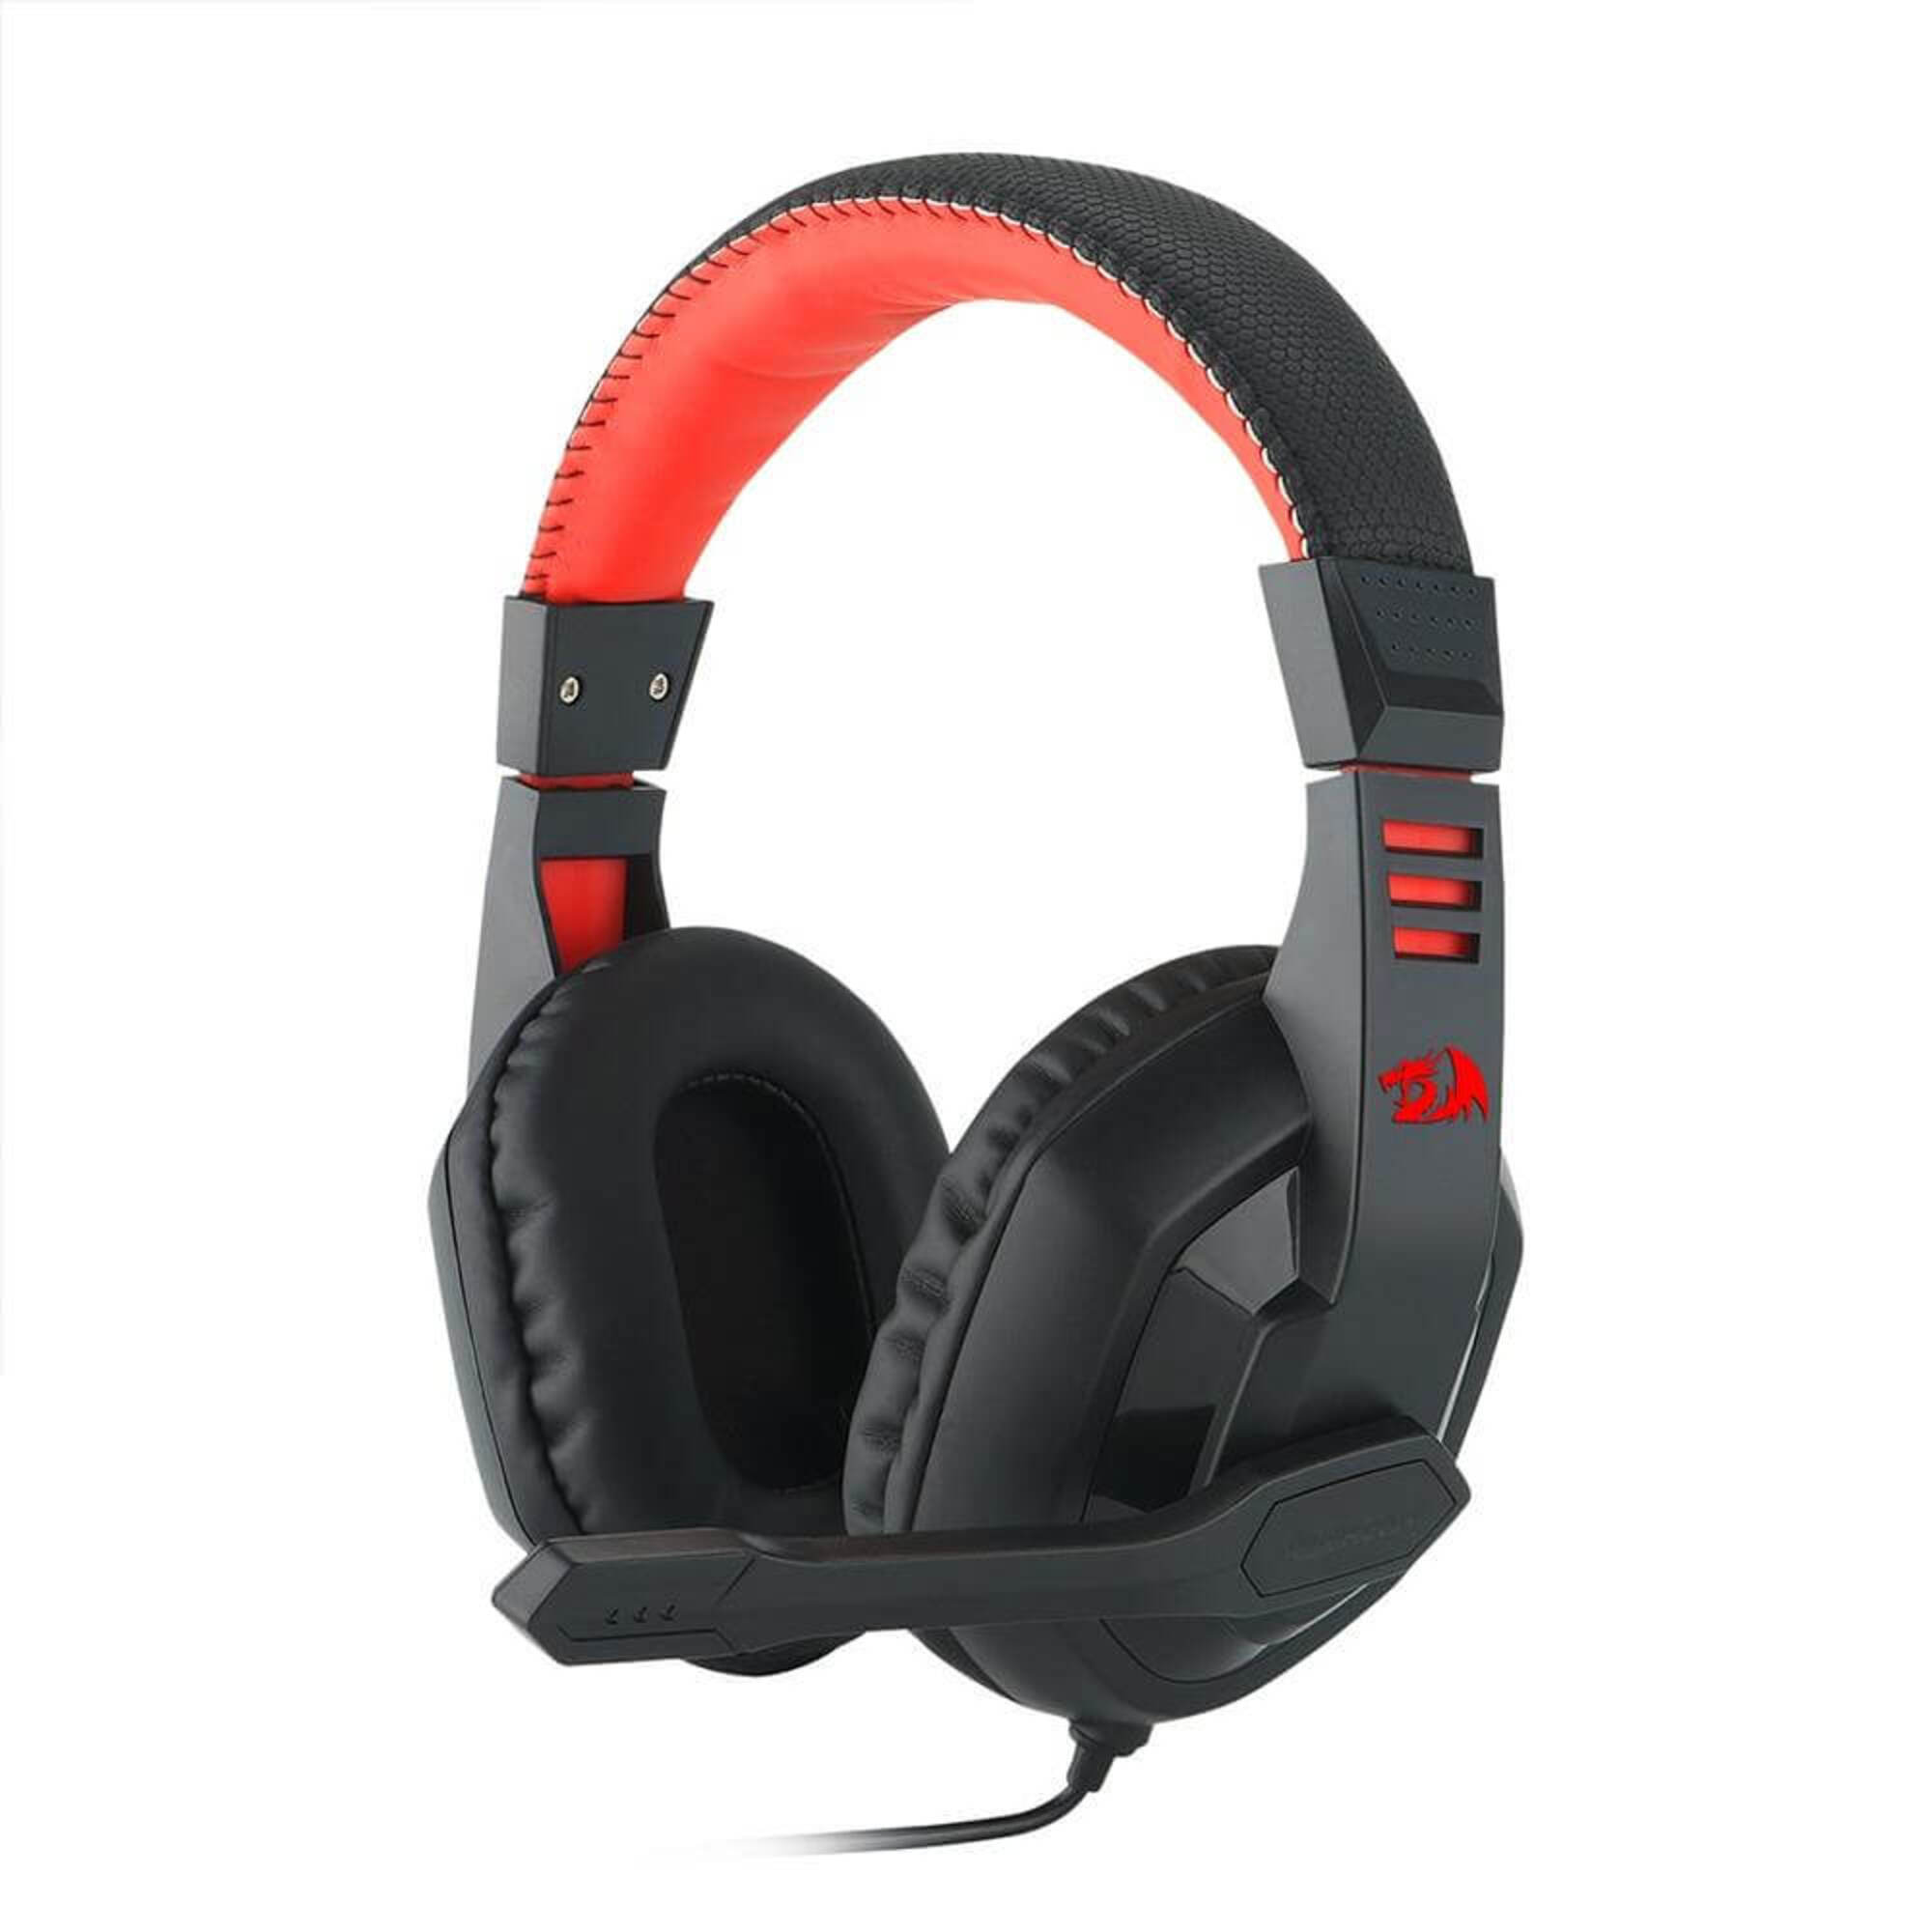 Headset Redragon Ares H120